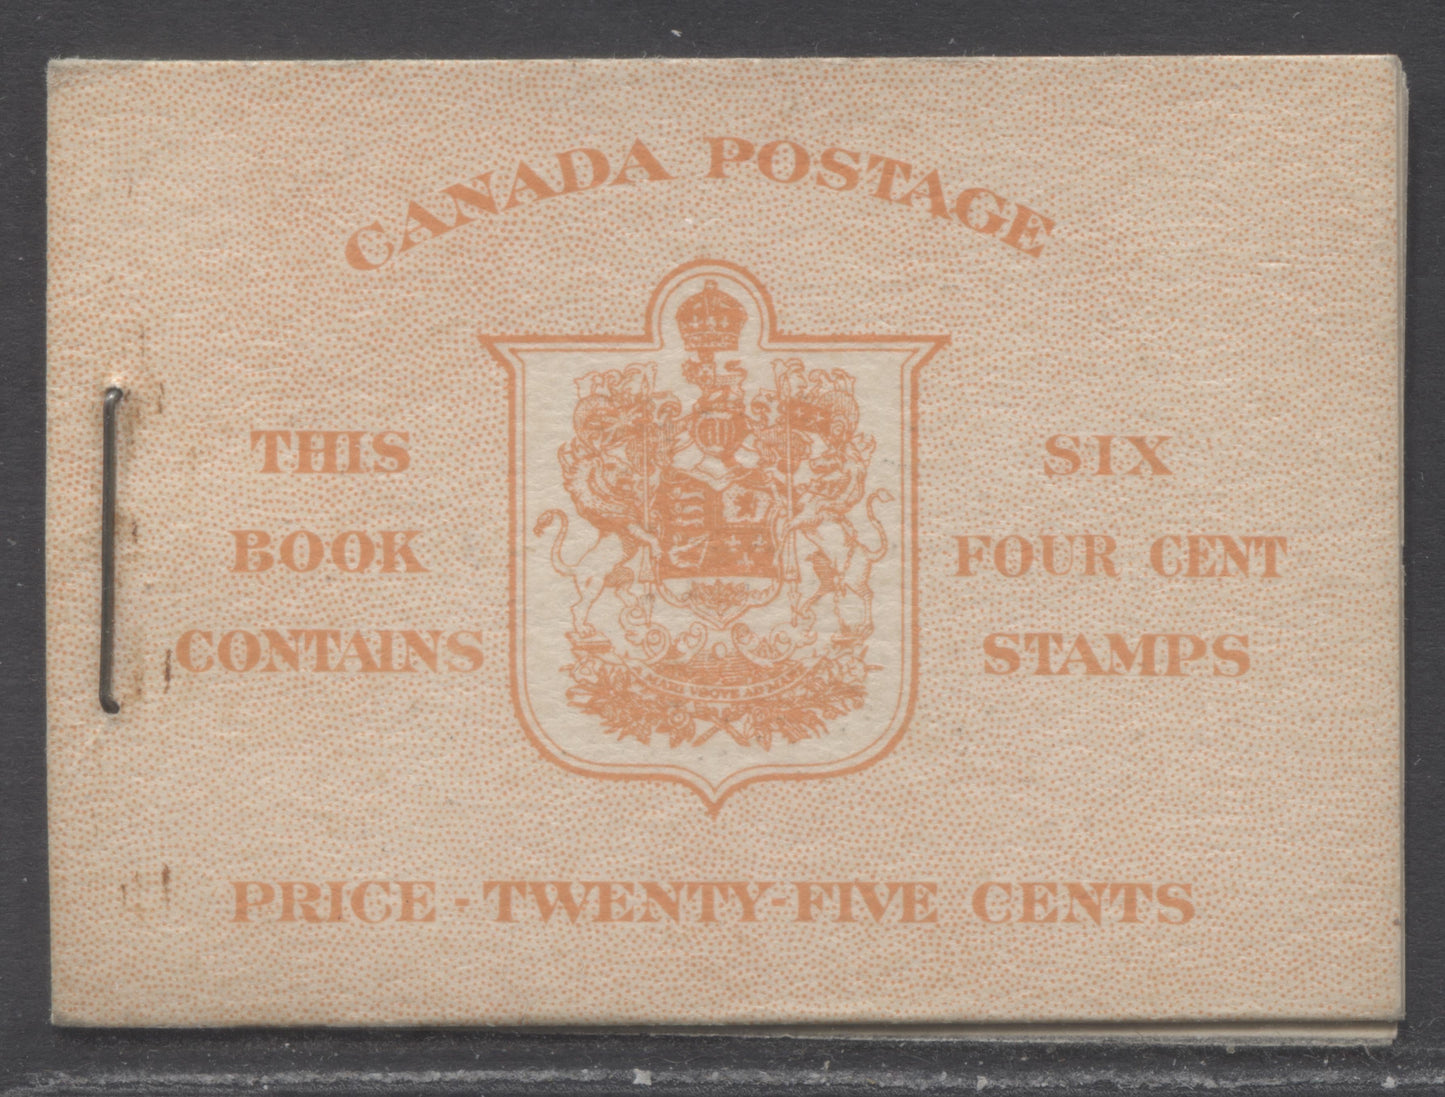 Lot 98A Canada #BK36cE 1942-1947 War Issue, A Complete 25c English Booklet, A Pane Of 6 4c Dark Carmine, Front Cover IIi, Type IA, Surcharged 7c & 6c Rate Page, 24,114,000 Issued